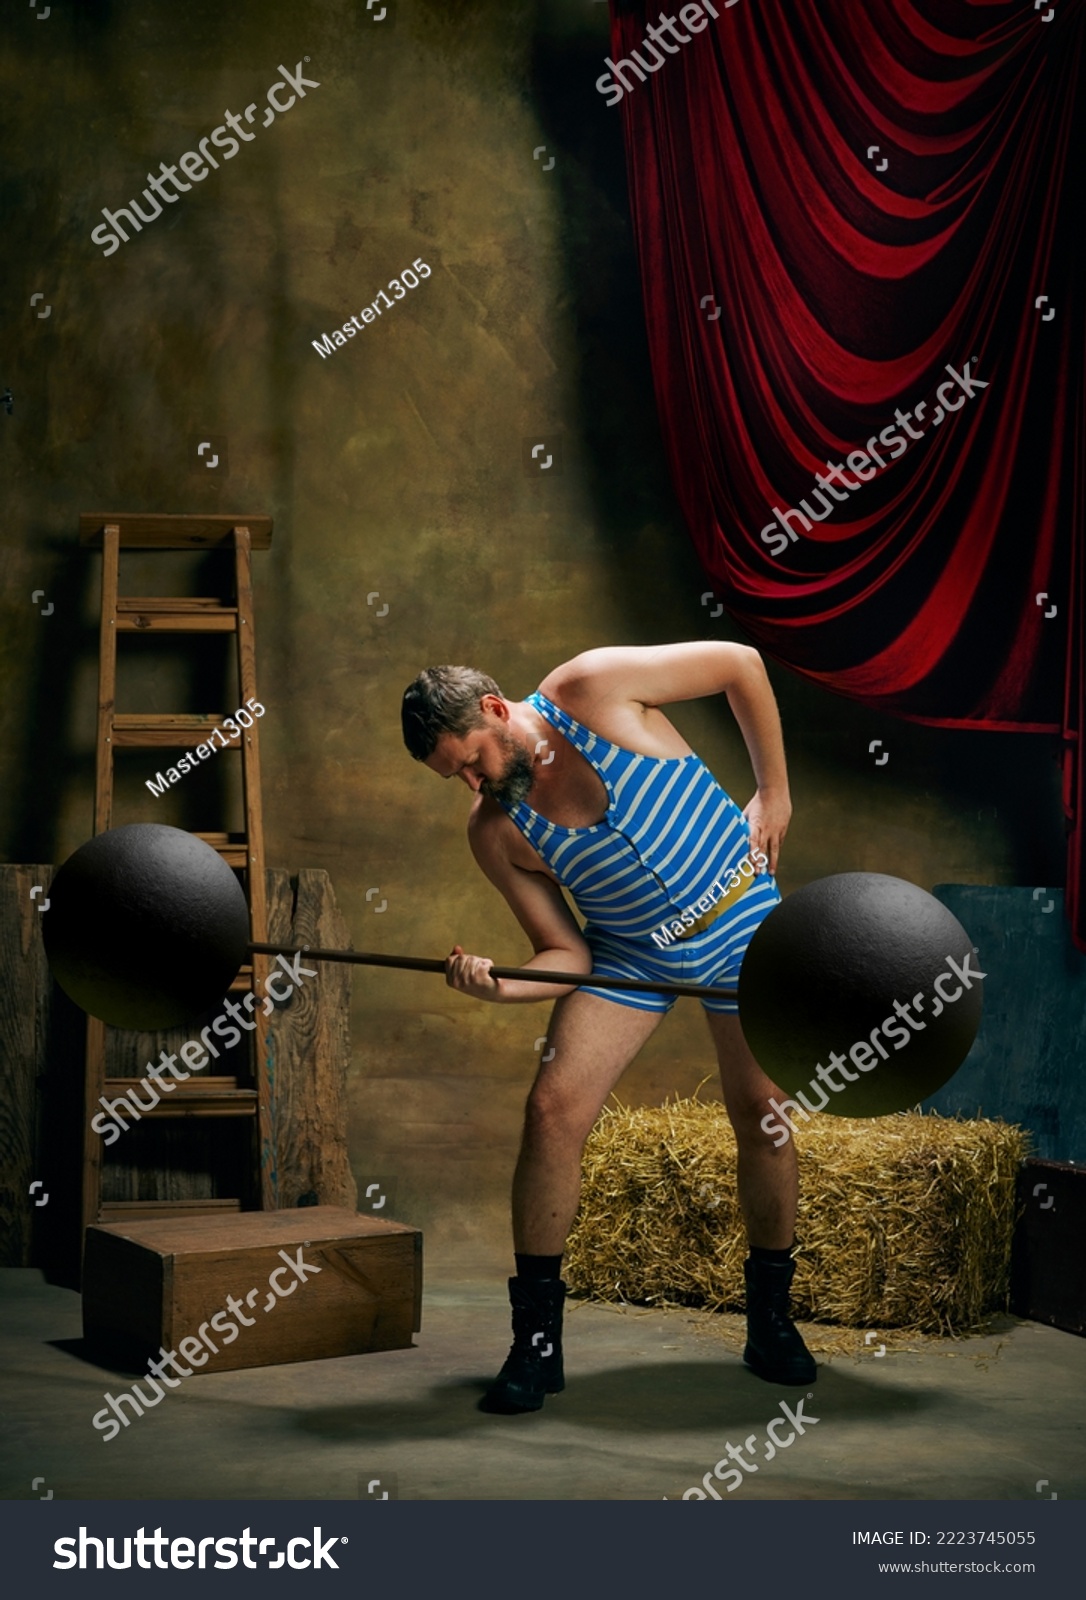 Circus athlete. Vintage portrait of retro circus strongman wearing blue striped sports swimsuit training with barbell over dark circus backstage background. Concept of creative art, fashion, style #2223745055